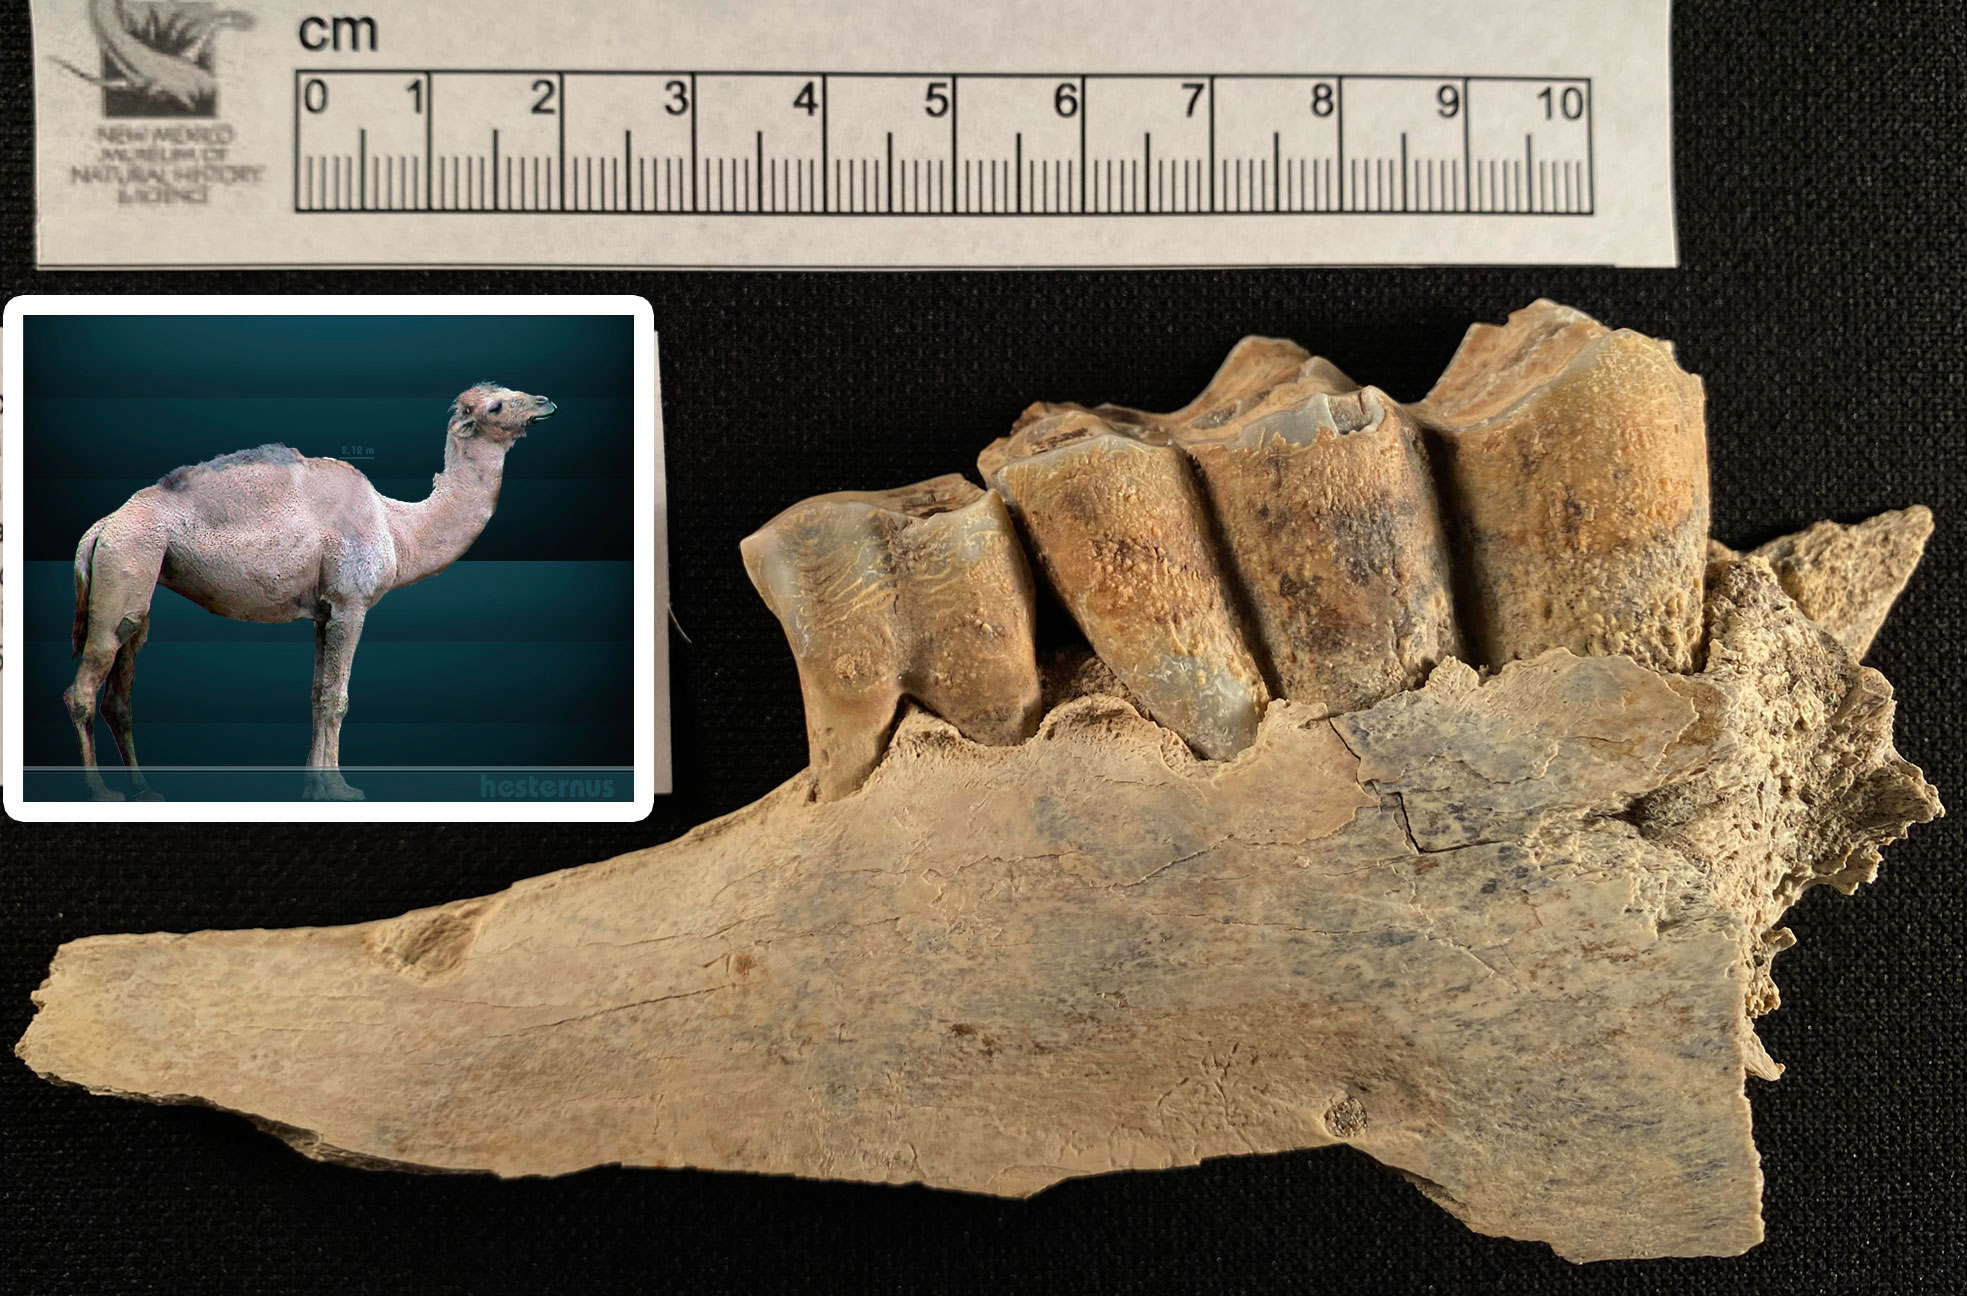 Photograph of a portion of the lower jaw of a Pleistocene camel from New Mexico. The photo shows a fragment of jawbone with two or tree teeth; photograph taken from the side, specimen measuring more than 10 centimeters. An inset image is a artistic rending of the camel as it may have appeared in life. It looks similar to a modern camel (long legs, thick body, long curved neck) but lacks a defined hump.